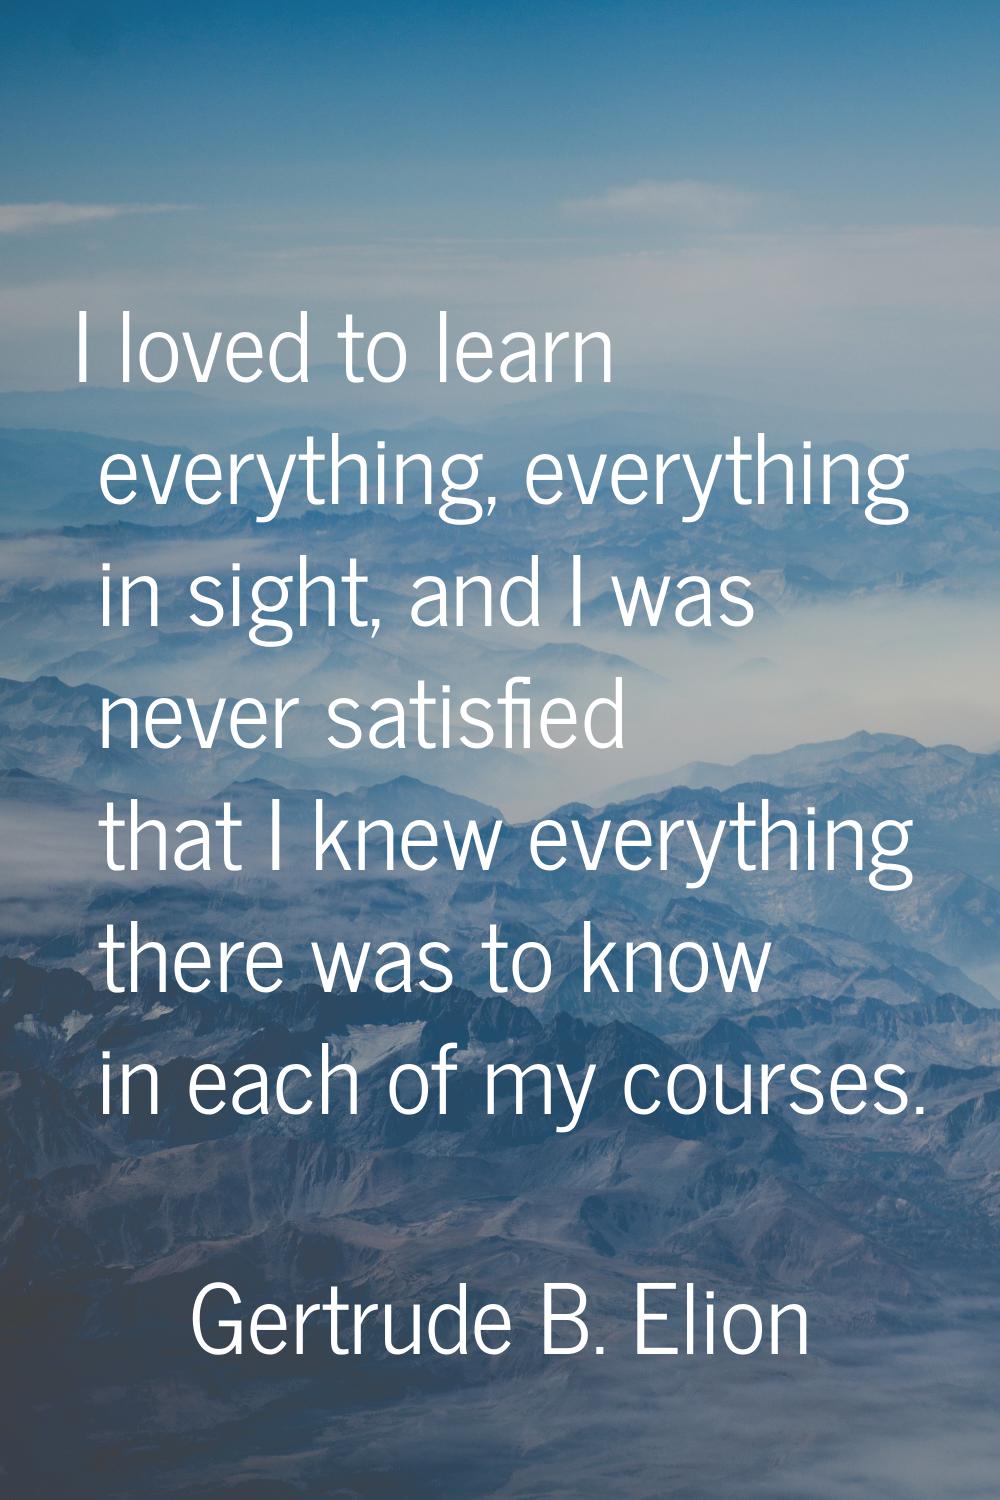 I loved to learn everything, everything in sight, and I was never satisfied that I knew everything 